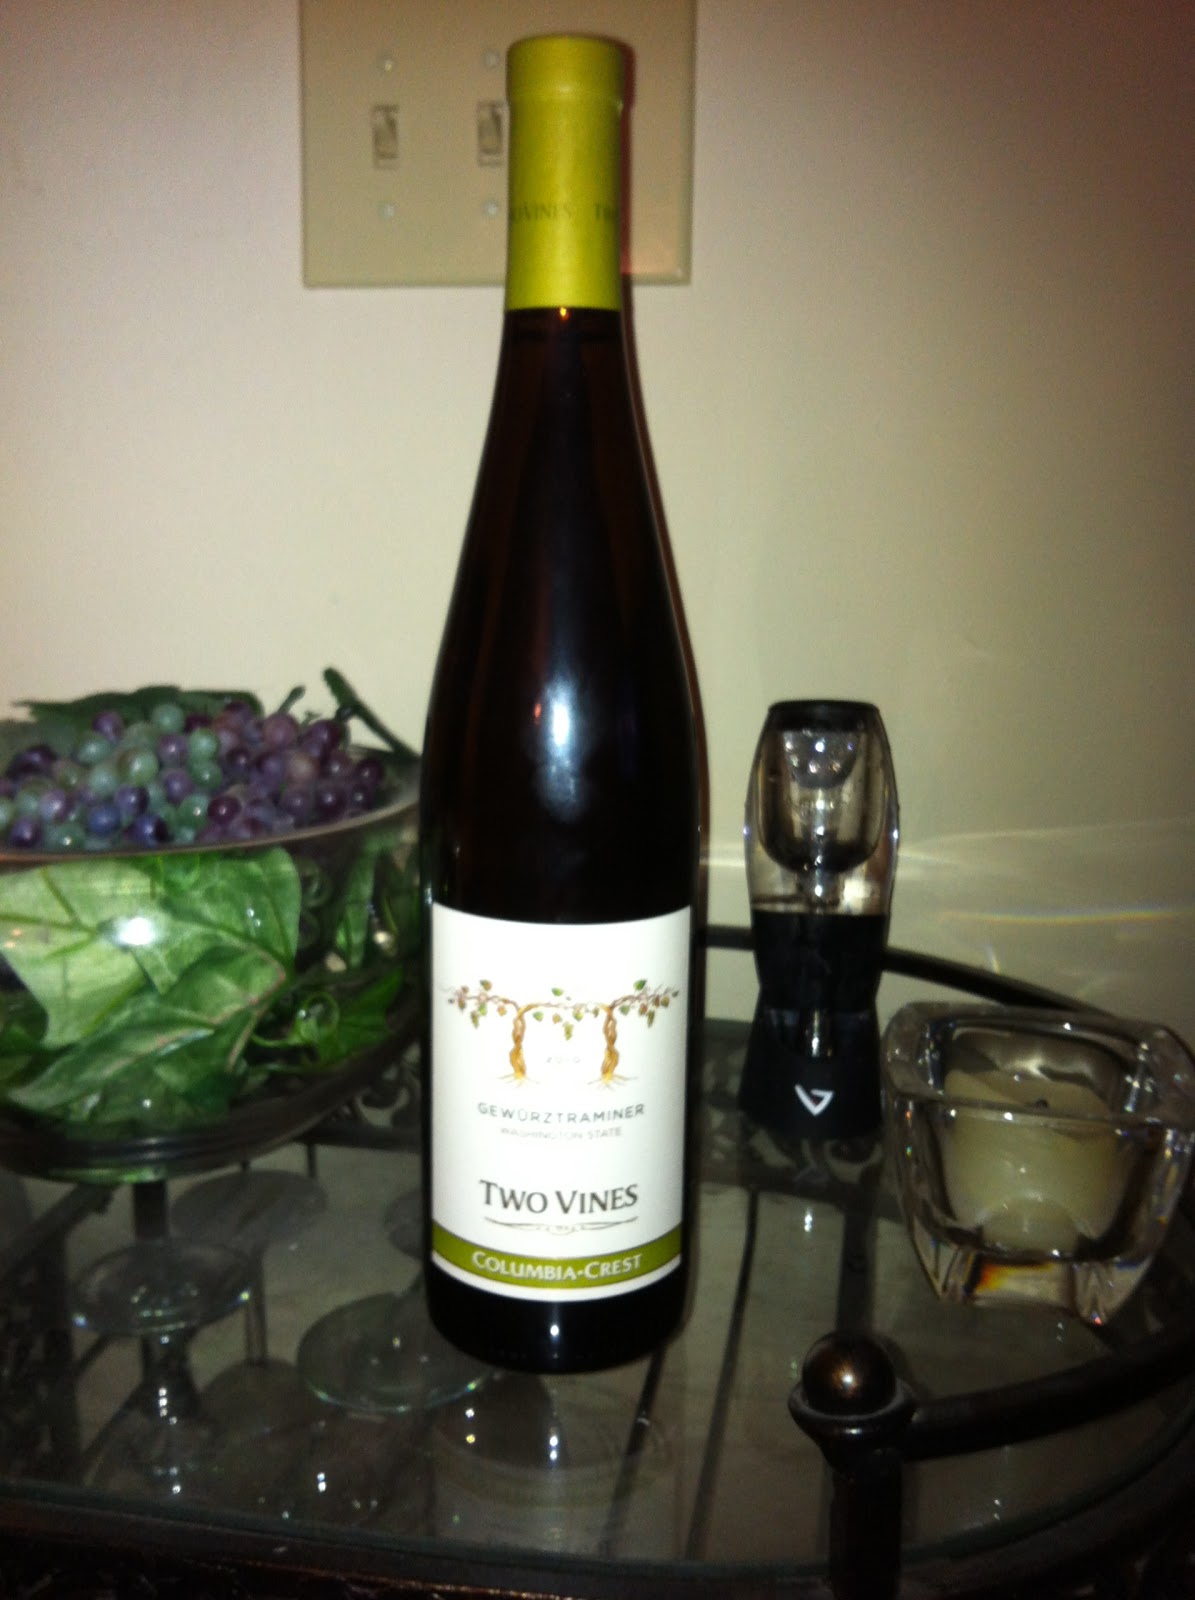 The Pinot and The Pauper: Two Vines Columbia Crest 2010 Gewurztraminer